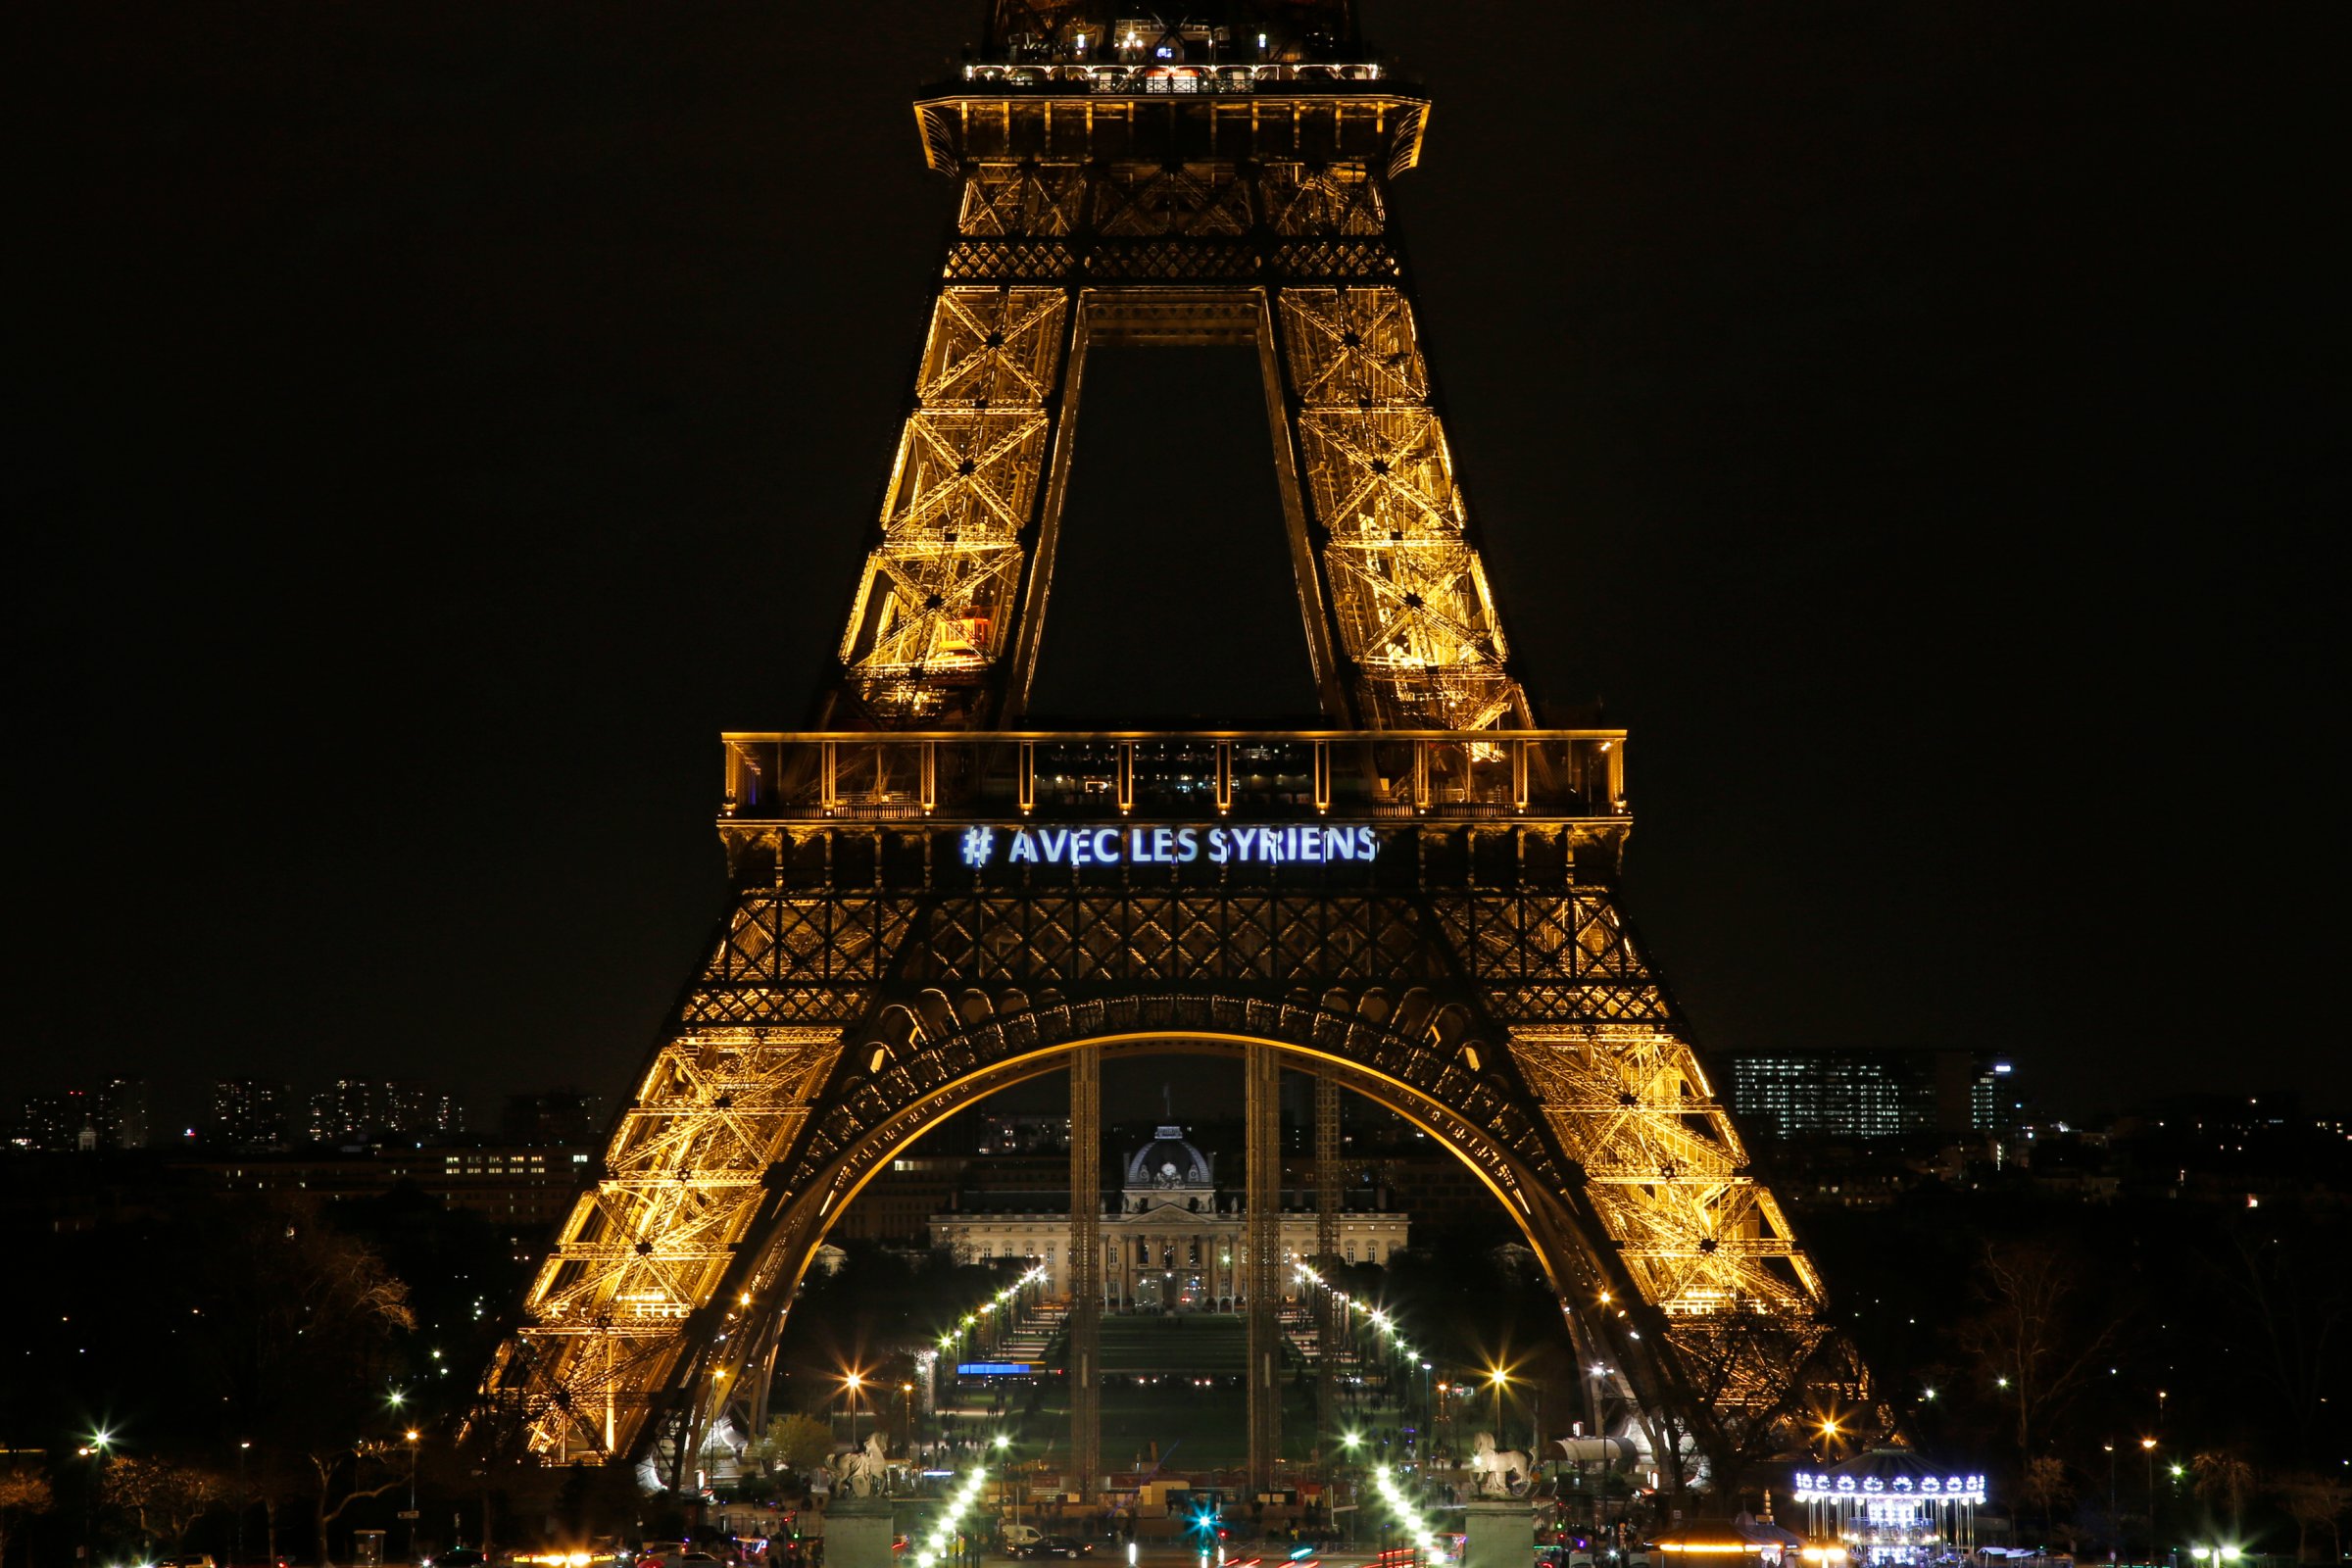 The words "With the Syrians" are displayed on the Eiffel Tower in support of Syrians on the third anniversary of the conflict, in Paris